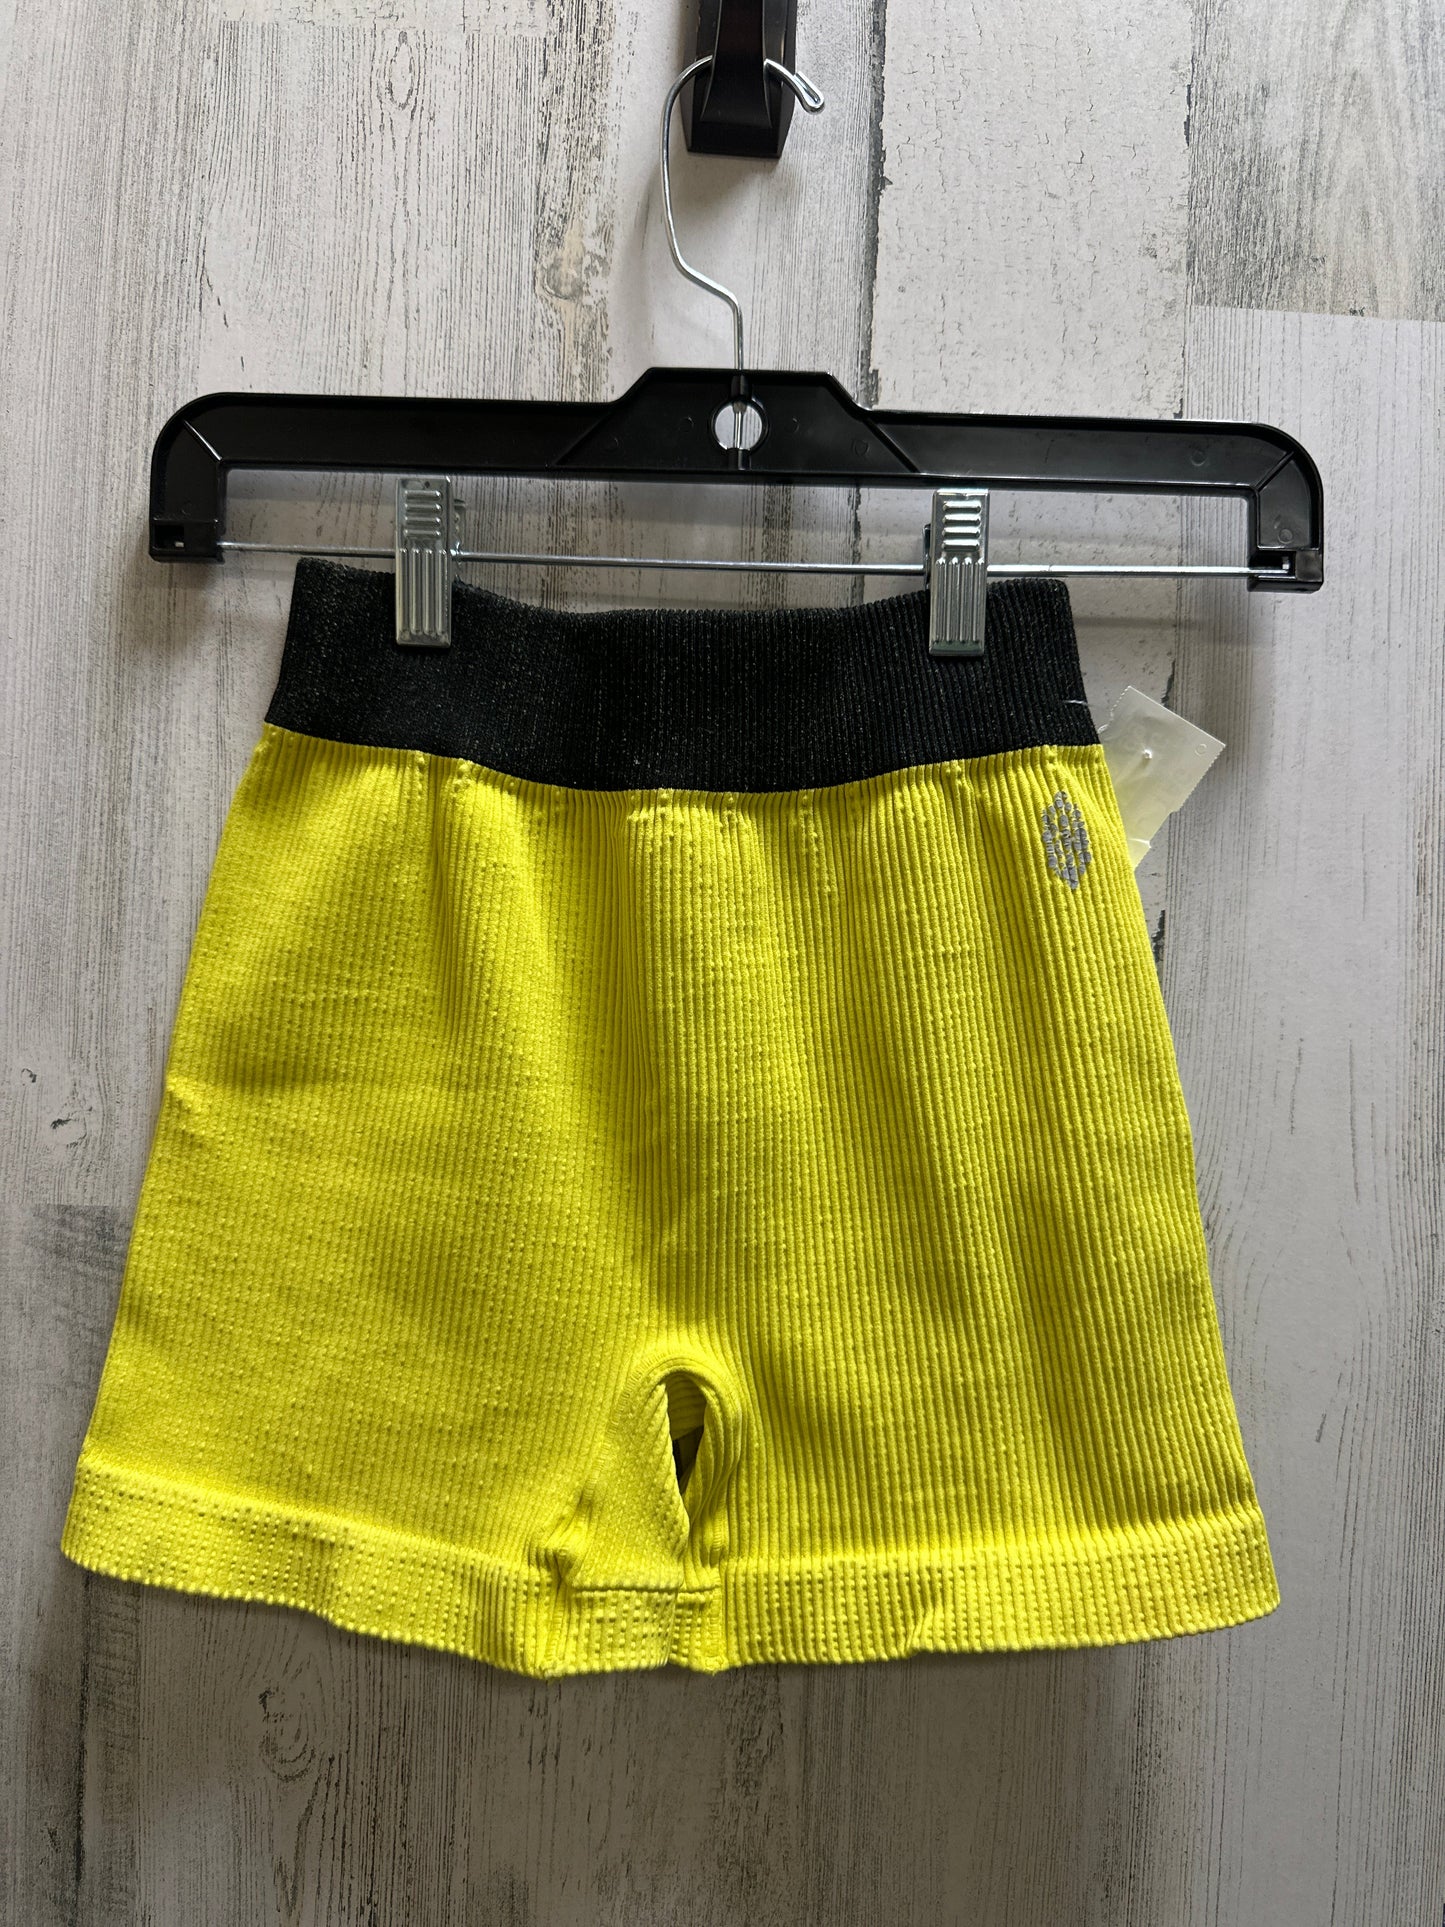 Yellow Athletic Shorts 2 Pc Free People, Size Xs